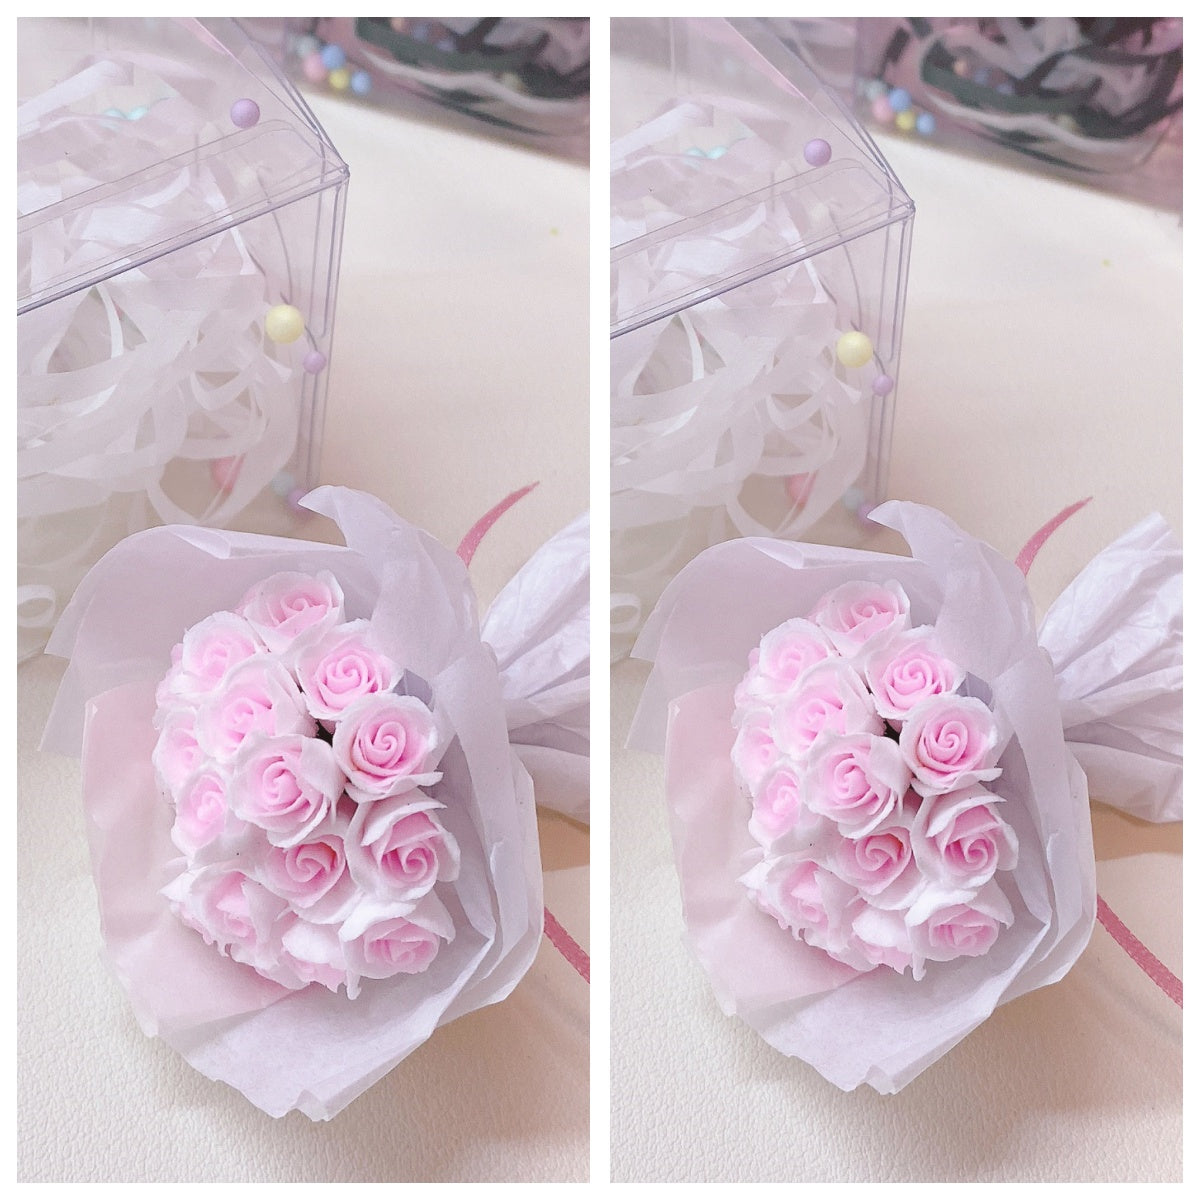 Mini Handmade Clay Roses Flower with Box for Decorating Gift Mini Doll House